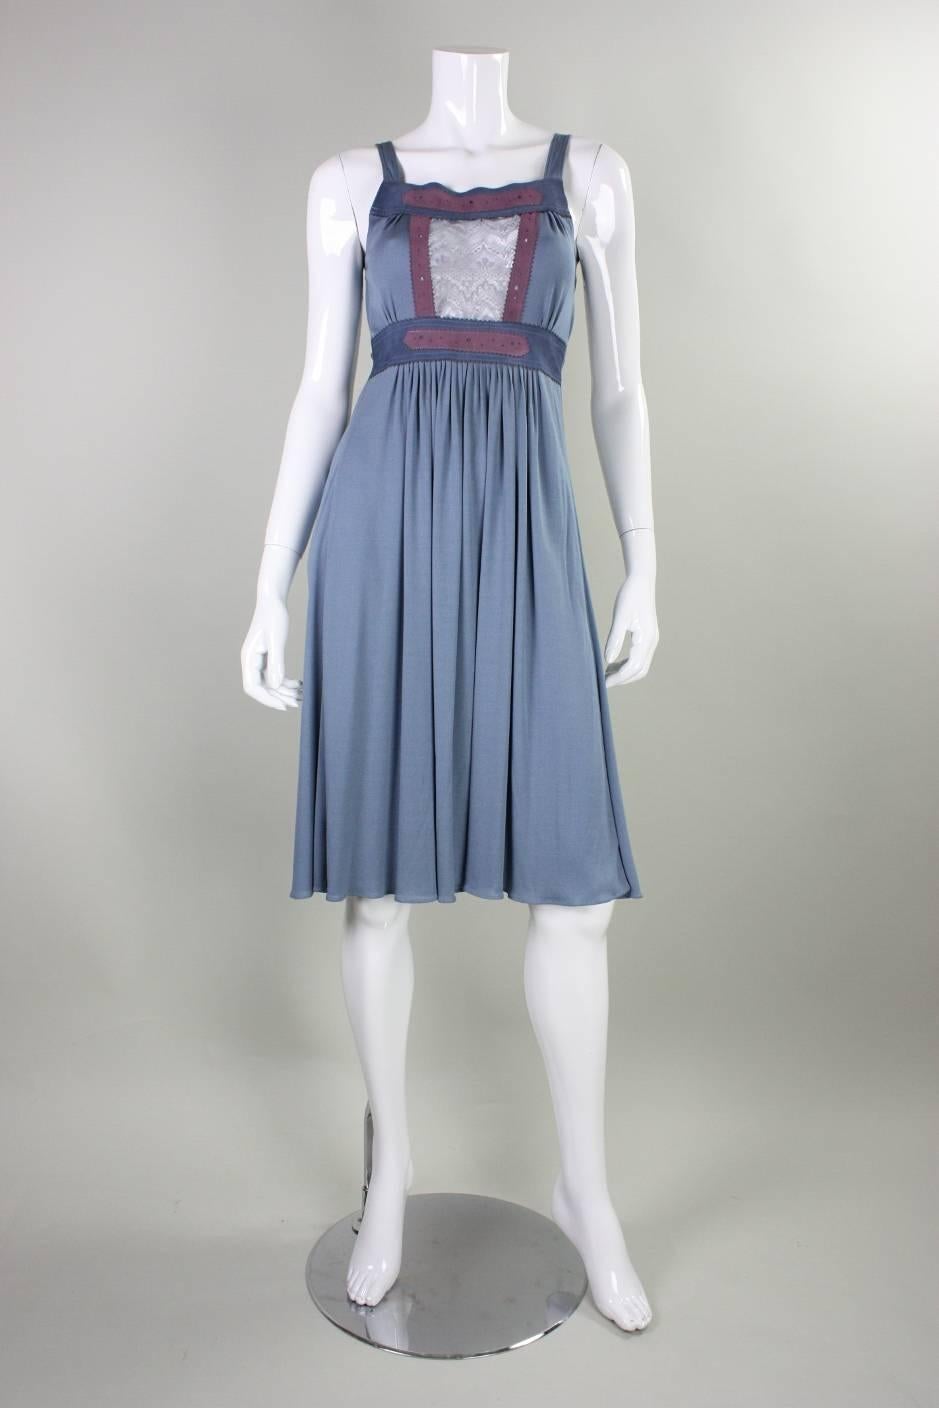 Vintage dress from Ann Buck dates to the 1970's and is made of slate blue matte jersey.  It features a sheer lace panel at center front bust and suede accents.  Attached tie ties at center back waist.  Unlined.  No closures.
We estimate this dress